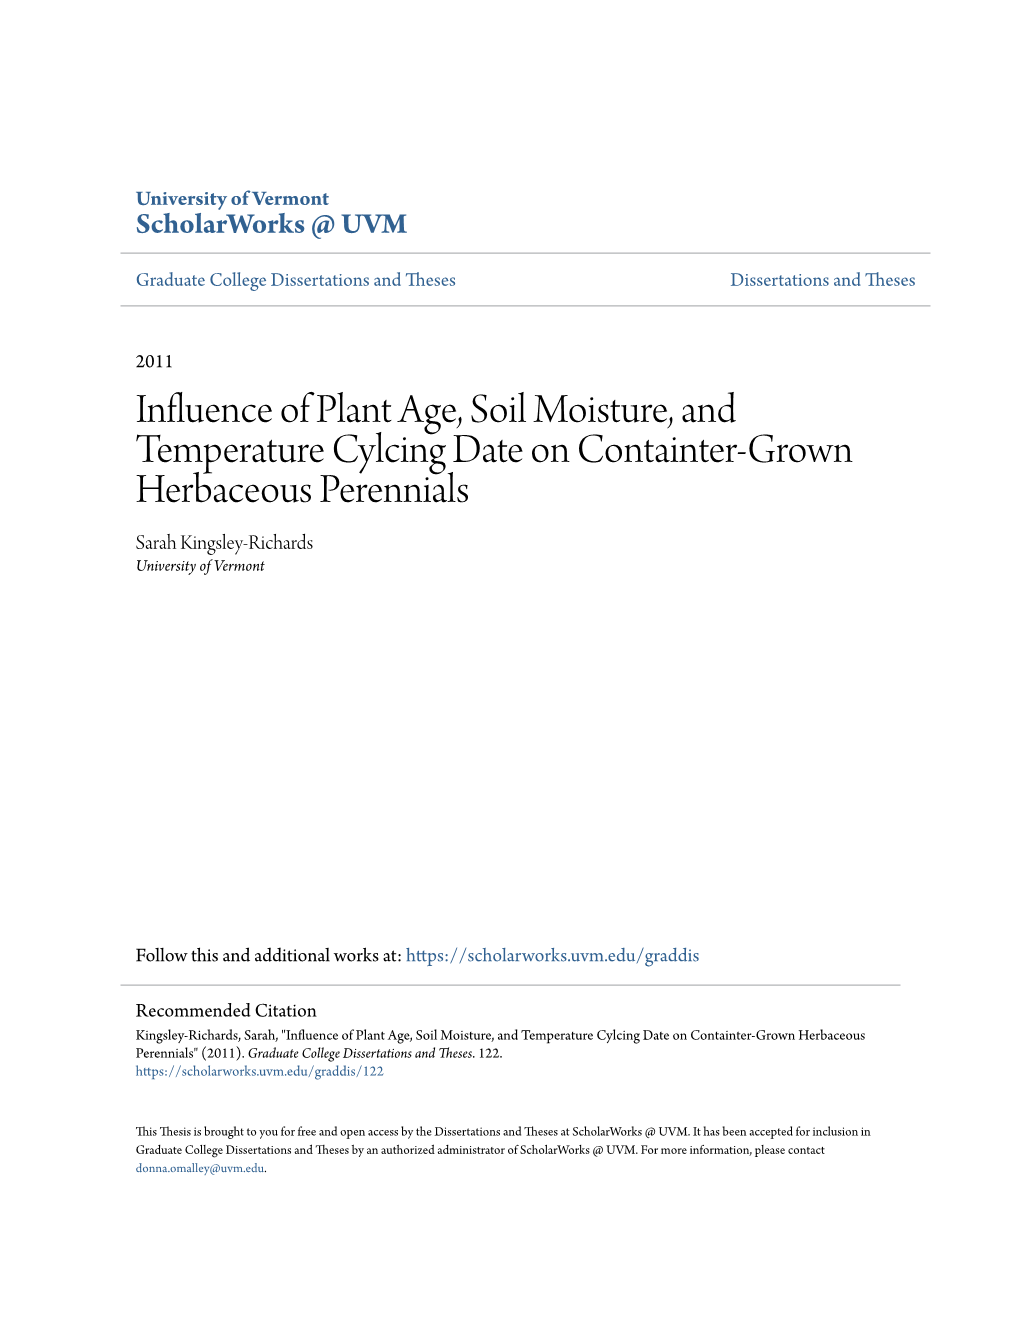 Influence of Plant Age, Soil Moisture, and Temperature Cylcing Date on Containter-Grown Herbaceous Perennials Sarah Kingsley-Richards University of Vermont